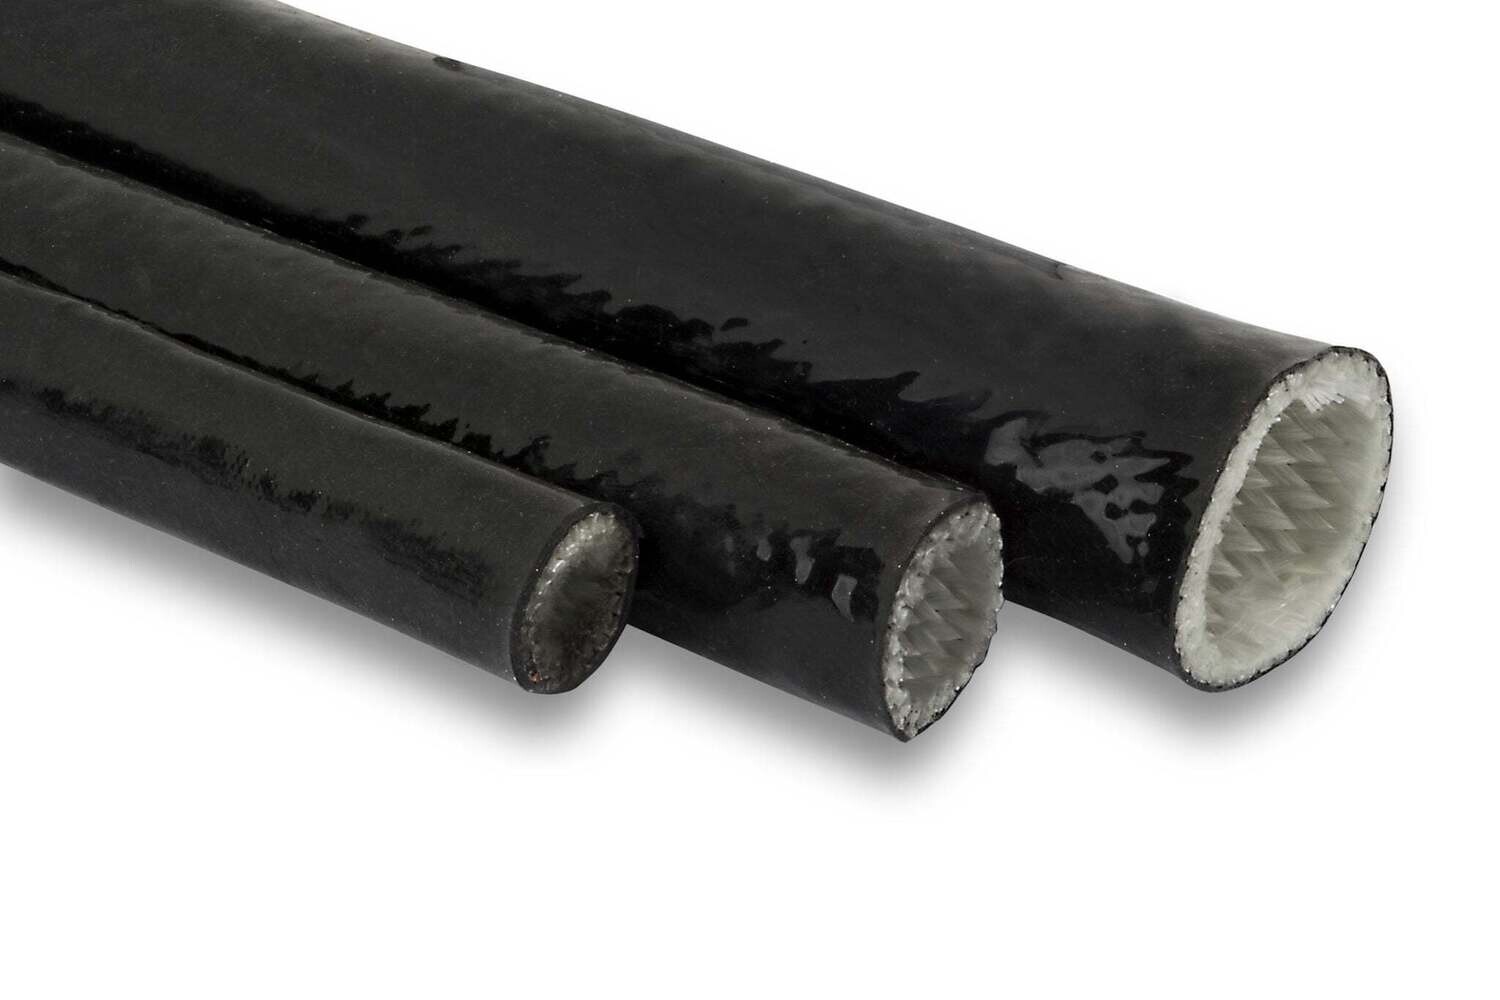 Black Silicon High Heat Sleeve - AN16 (Utilises 25mm Sleeving), 1.0m Multiple Qty will come on a continuous Roll